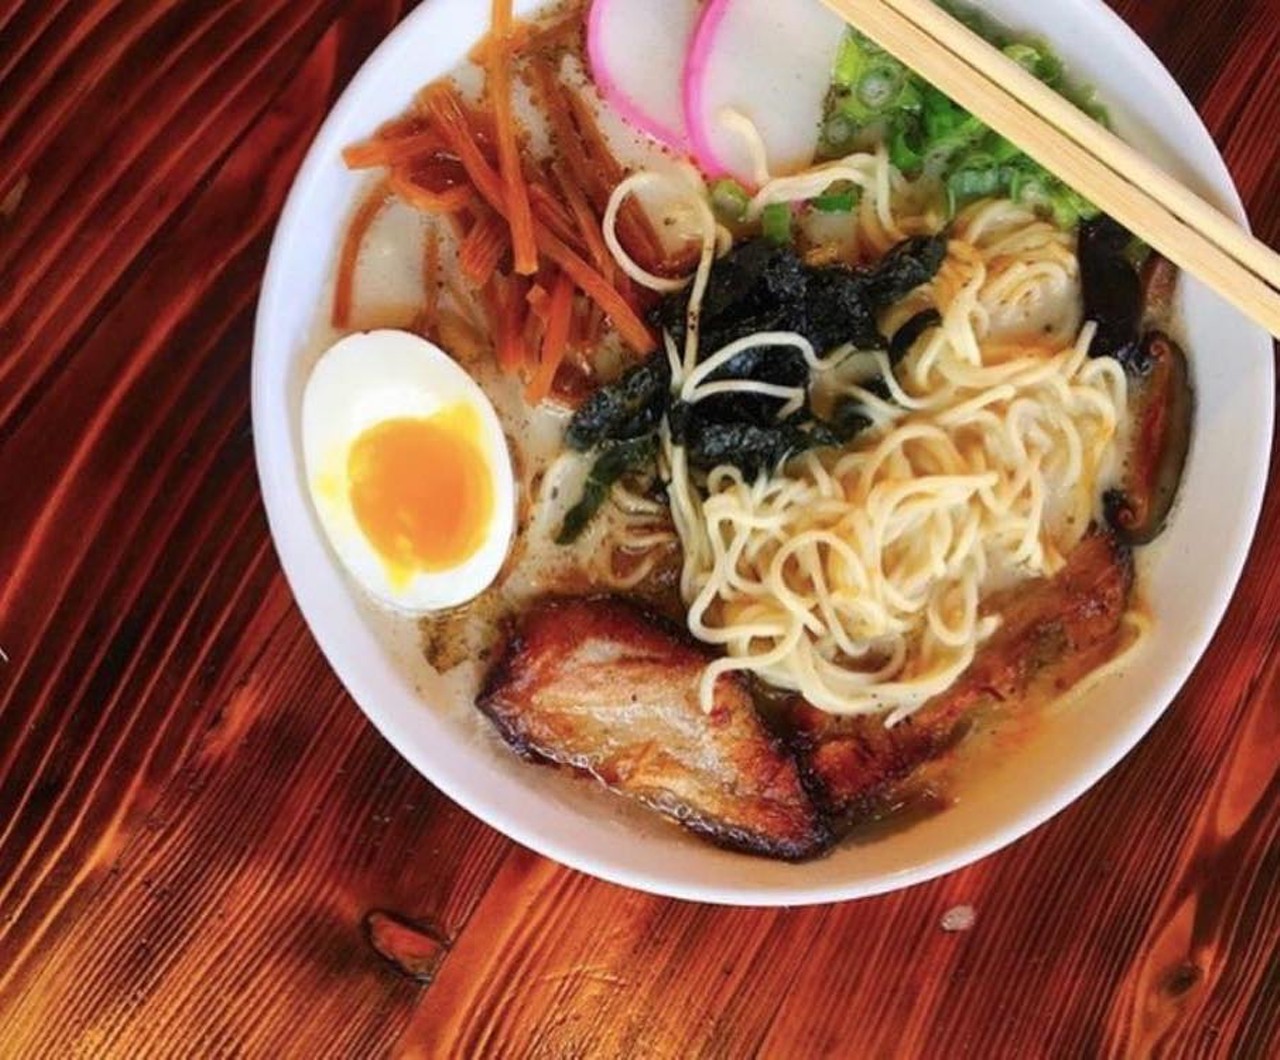 Here's Your First Look at Ramen Bar at The Cherrity Bar